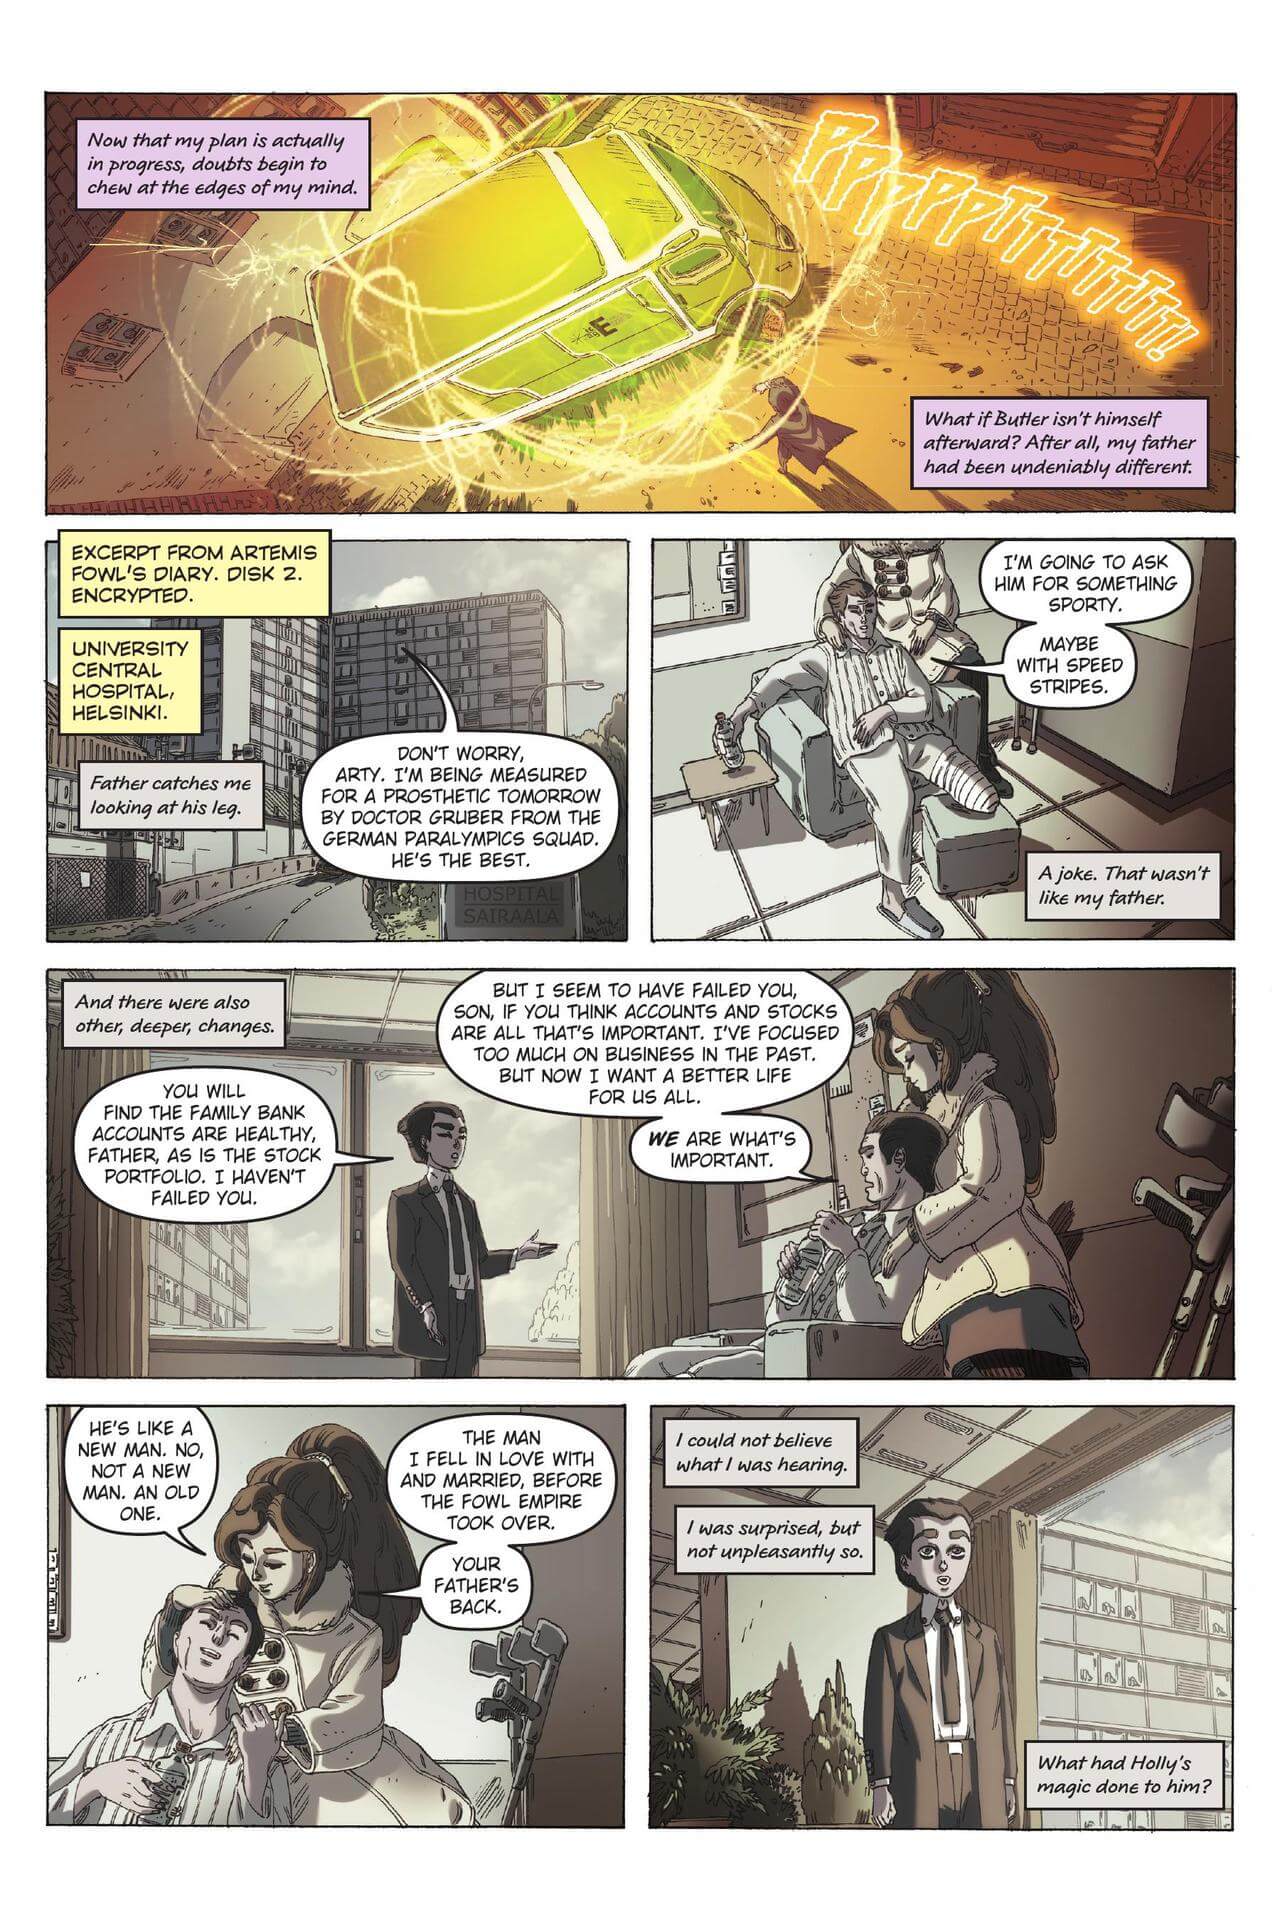 page 37 of artemis fowl eternity code graphic novel